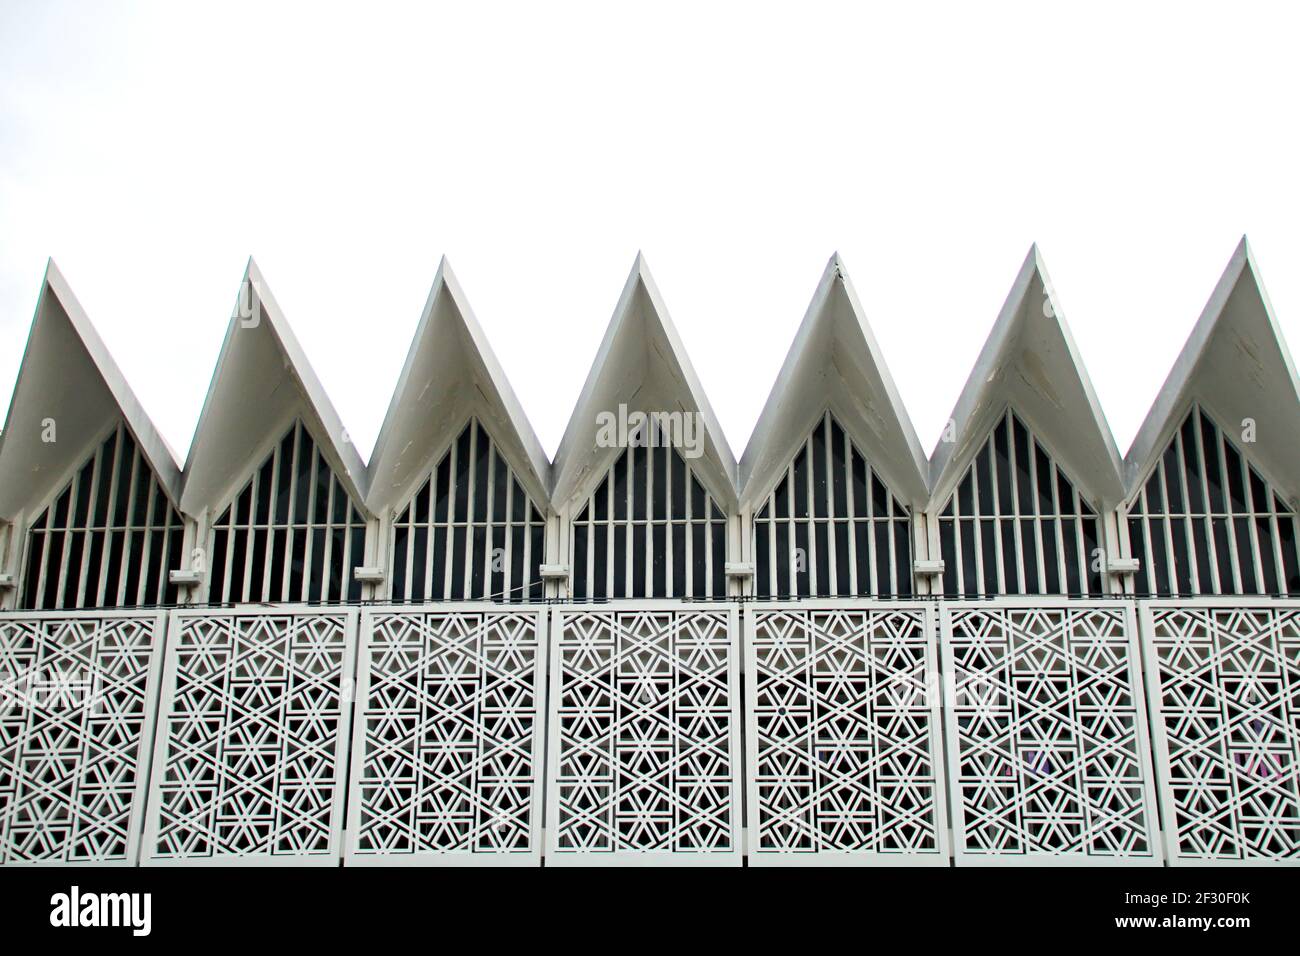 Islamic Architecture : An adjacent building next to Masjid Negara, the National Mosque of Malaysia in Kuala Lumpur Stock Photo